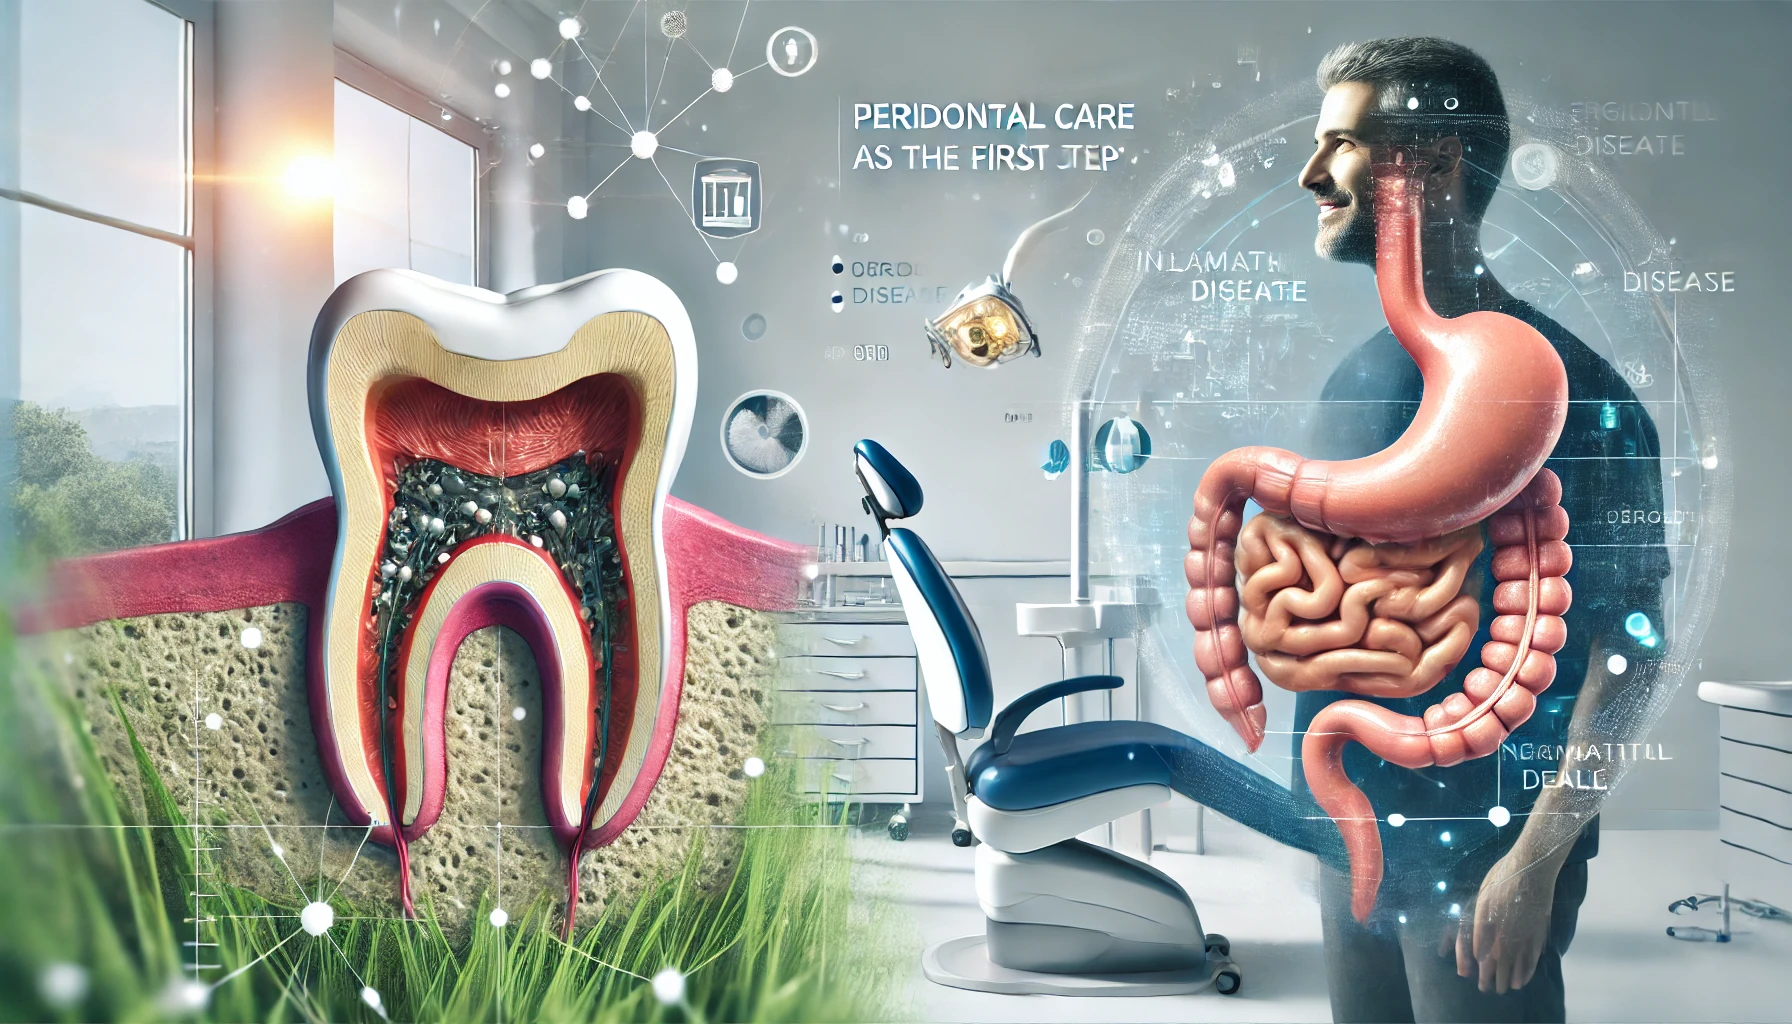 Periodontal Care and the Gateway to the Digestive System